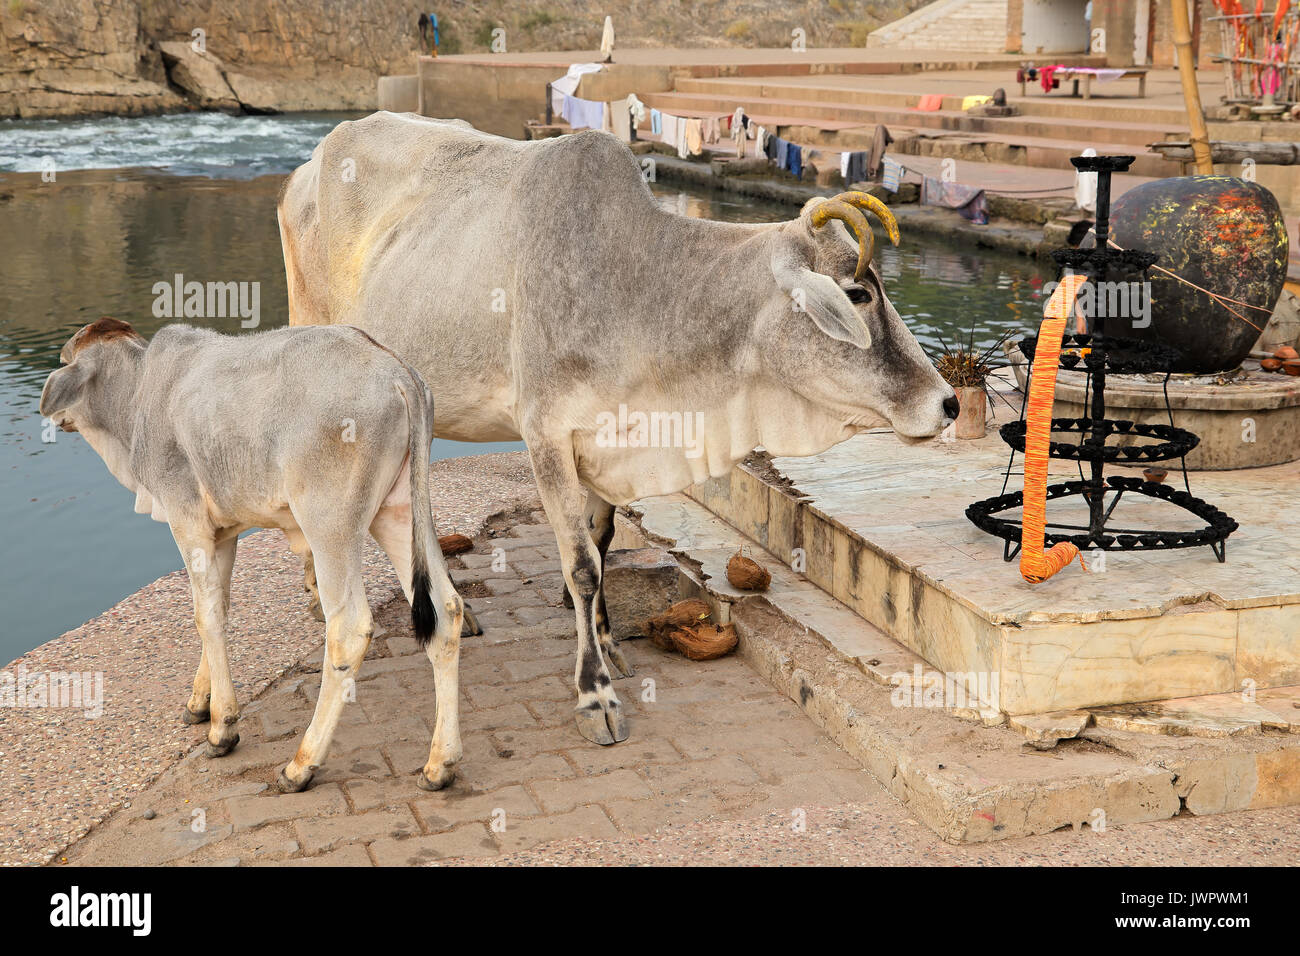 White Brahman cow and calf in rural India Stock Photo